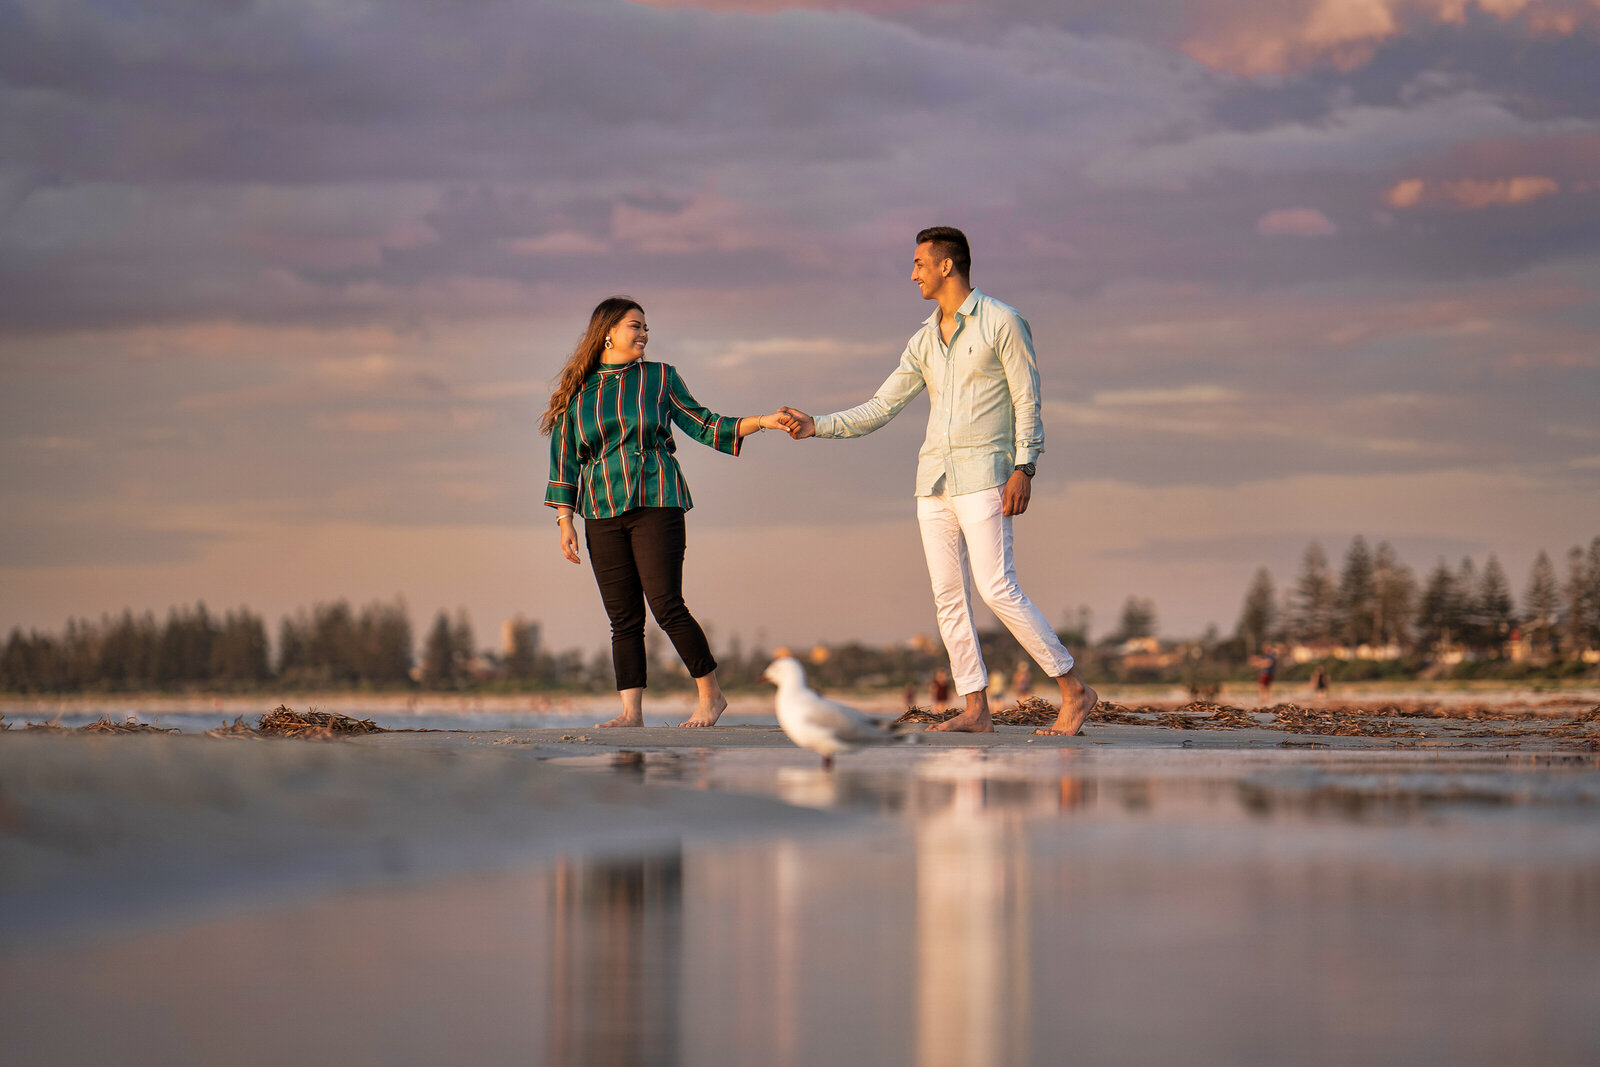 Adelaide_DreamTeamImaging_Engagement _Pre_Wedding_Photography_02